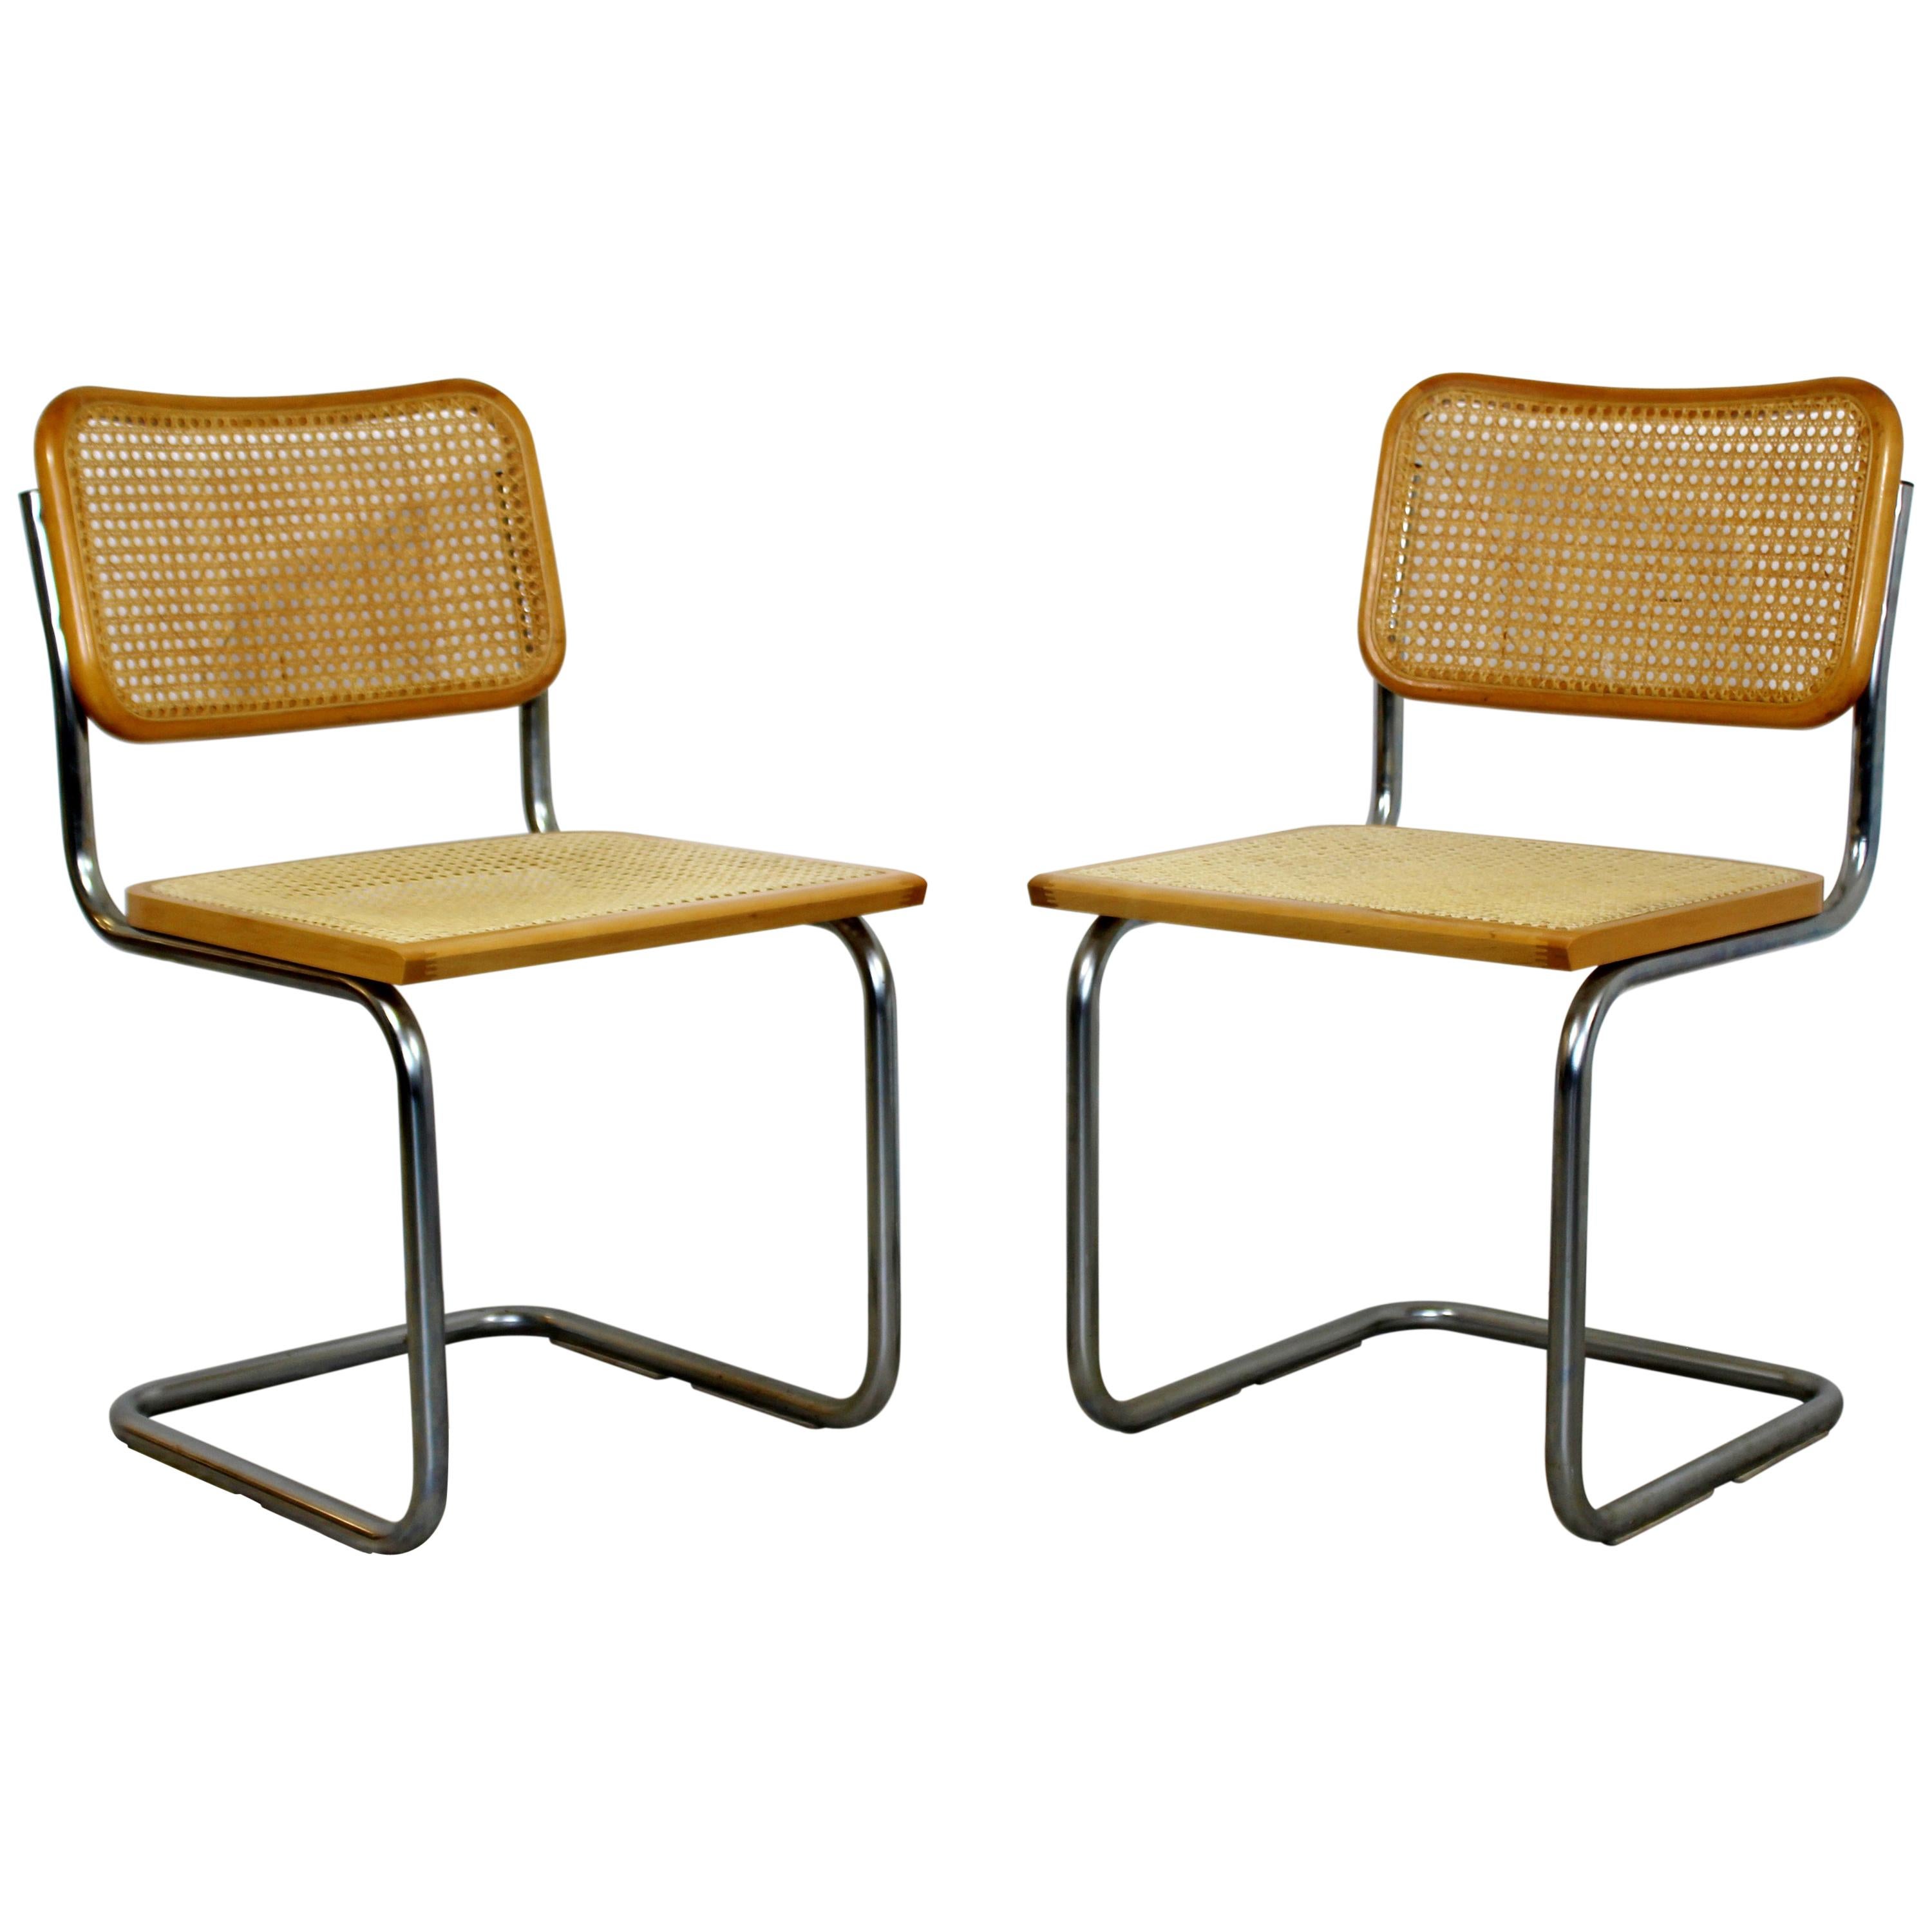 Mid-Century Modern Cantilever Chrome Rattan Side Chairs Breuer 1970s Italy, Pair